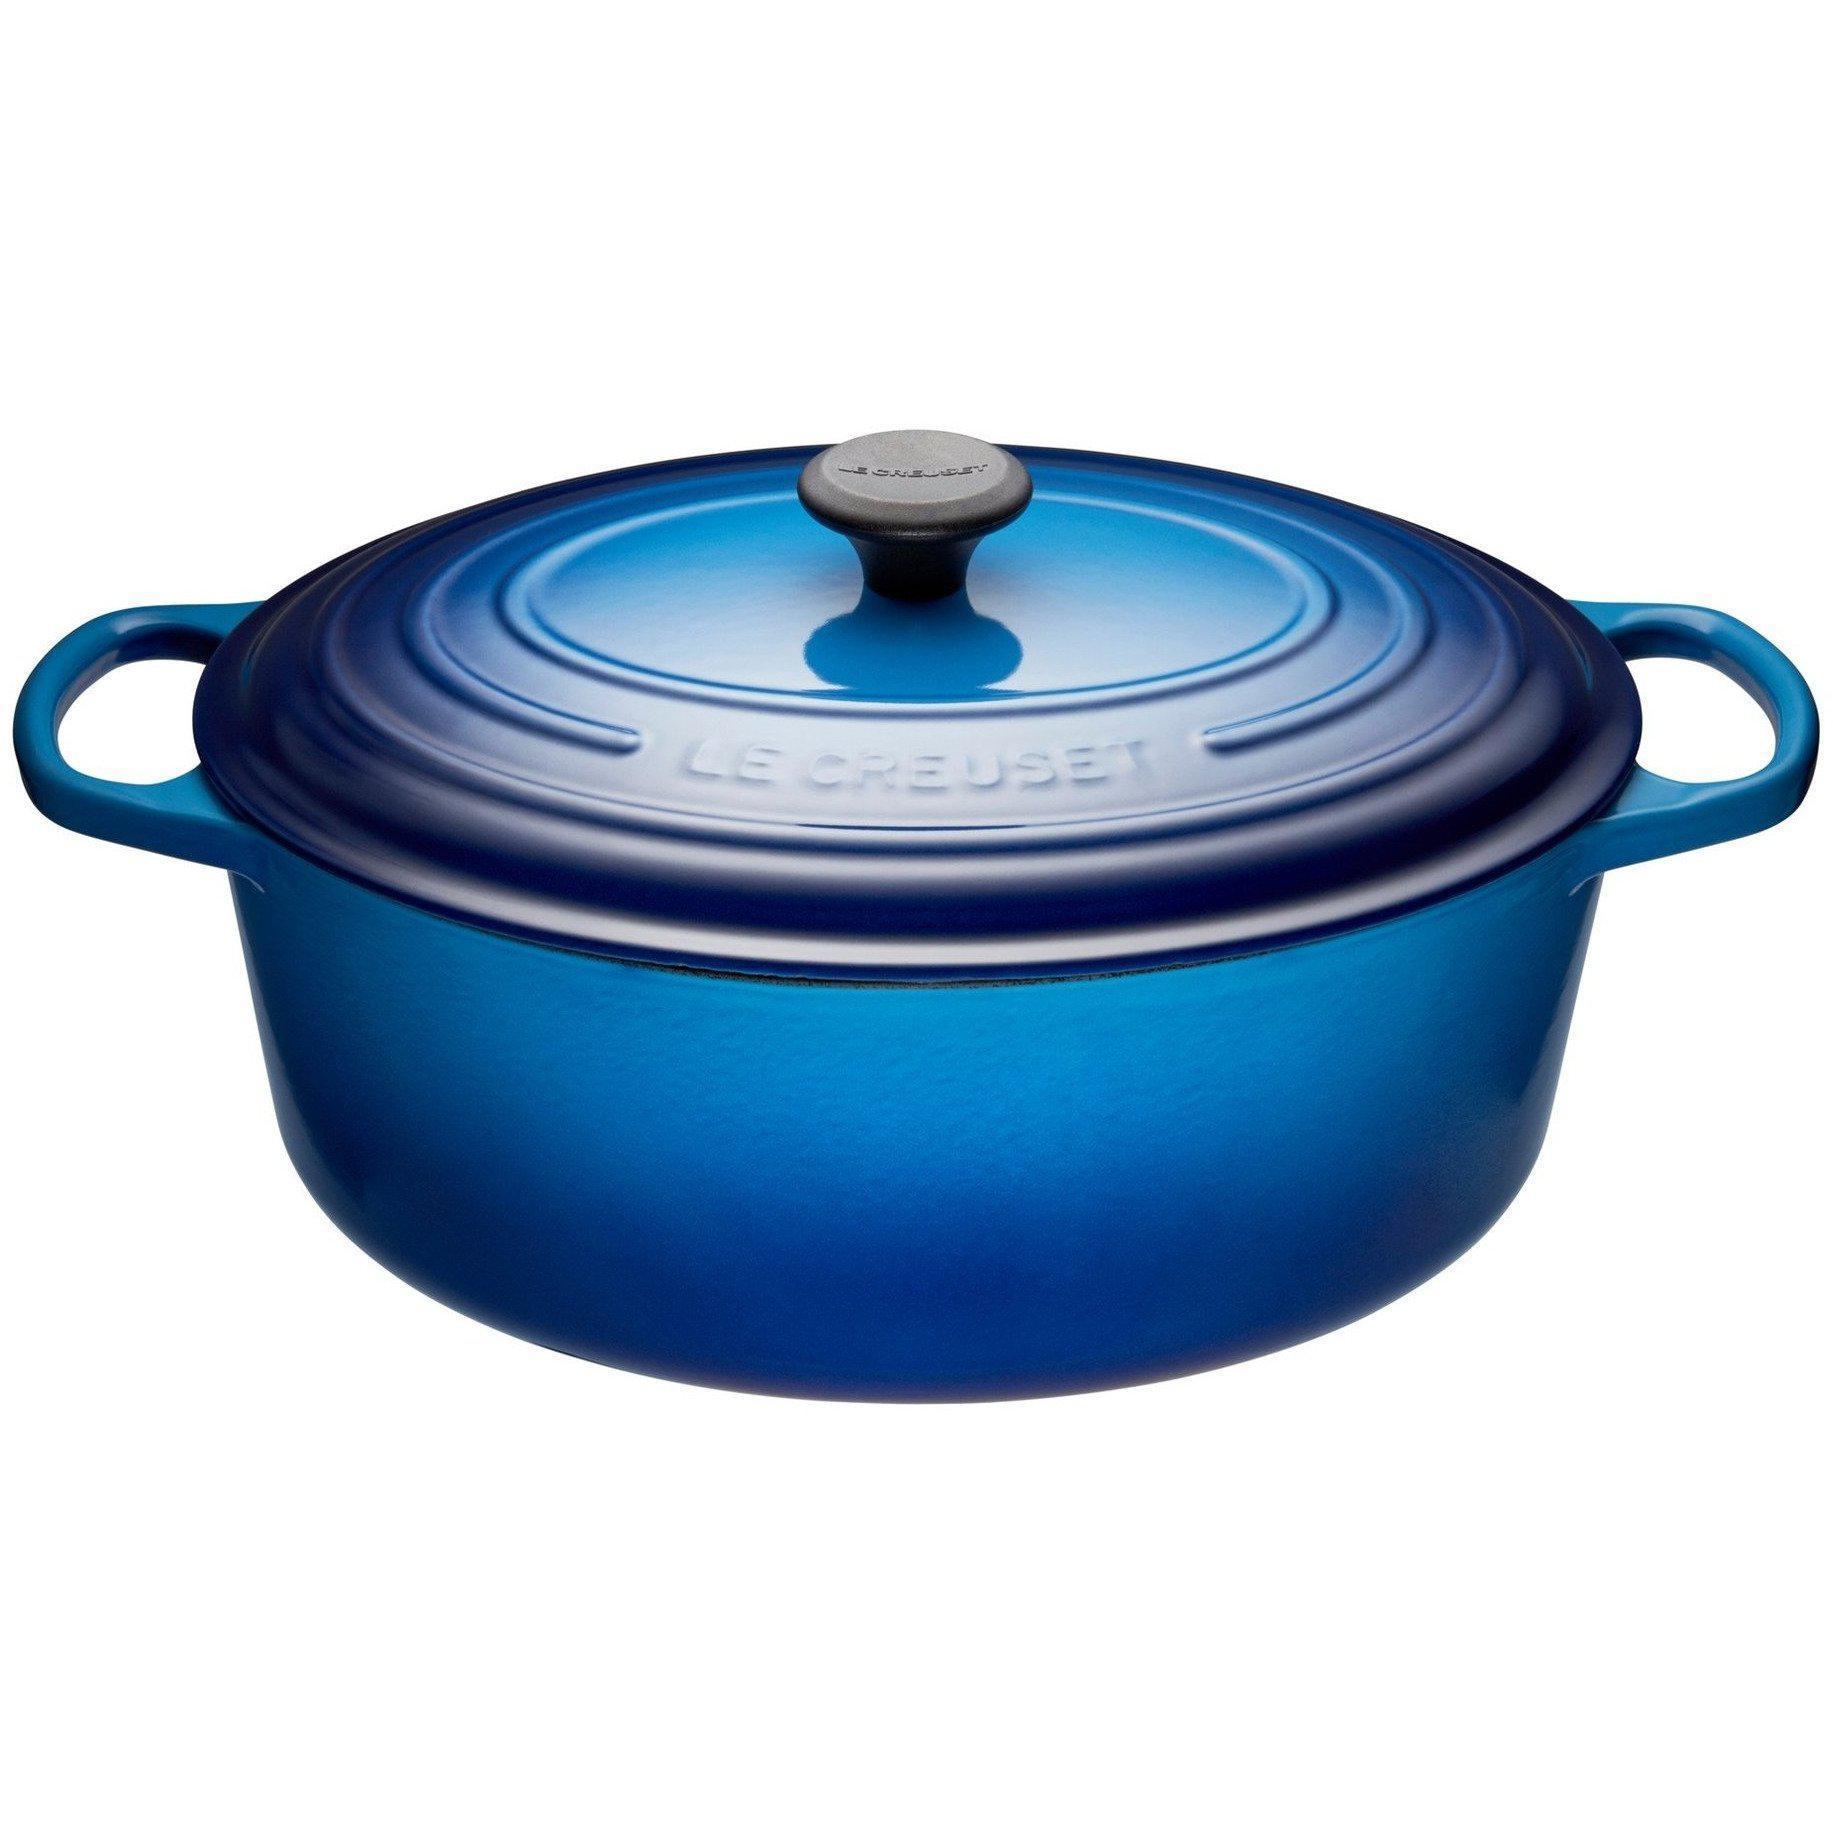 Le Creuset 6.3L Blueberry Oval French/Dutch Oven (31 cm) - LS2502-3192 ...